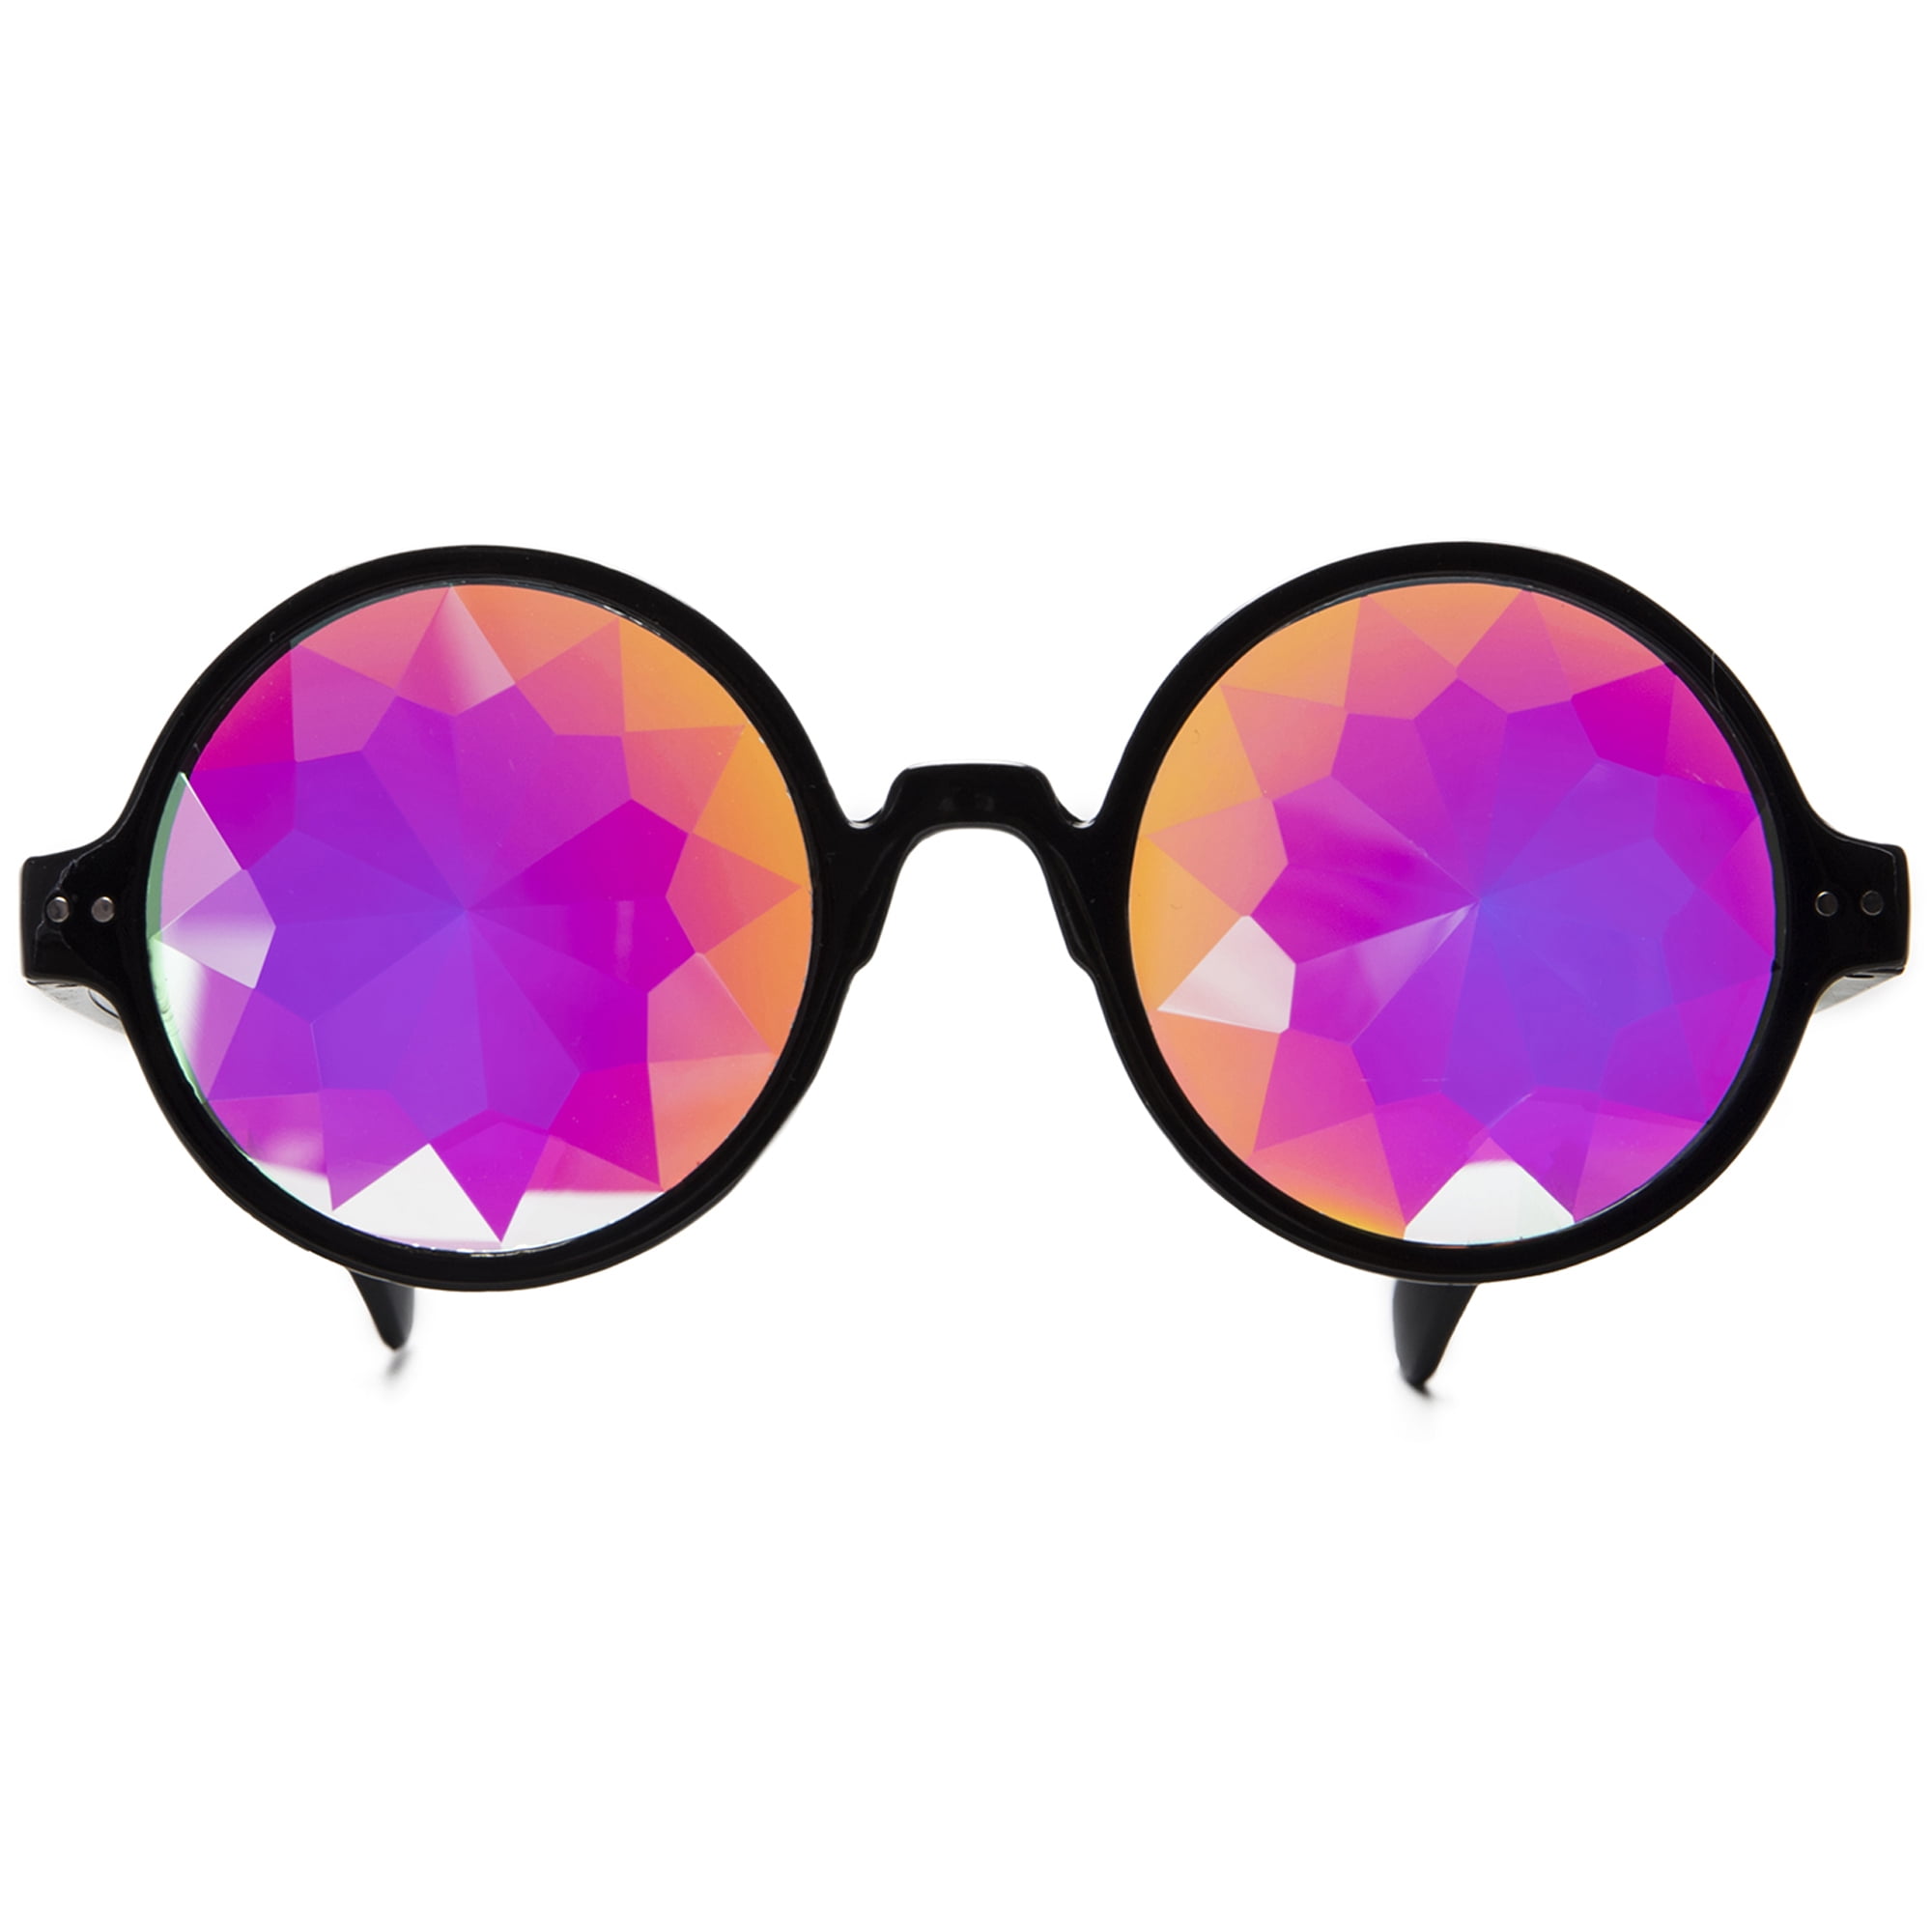 SODIAL Kaleidoscope Glasses Rave Festival Party Sunglasses Diffracted Lens-Pink